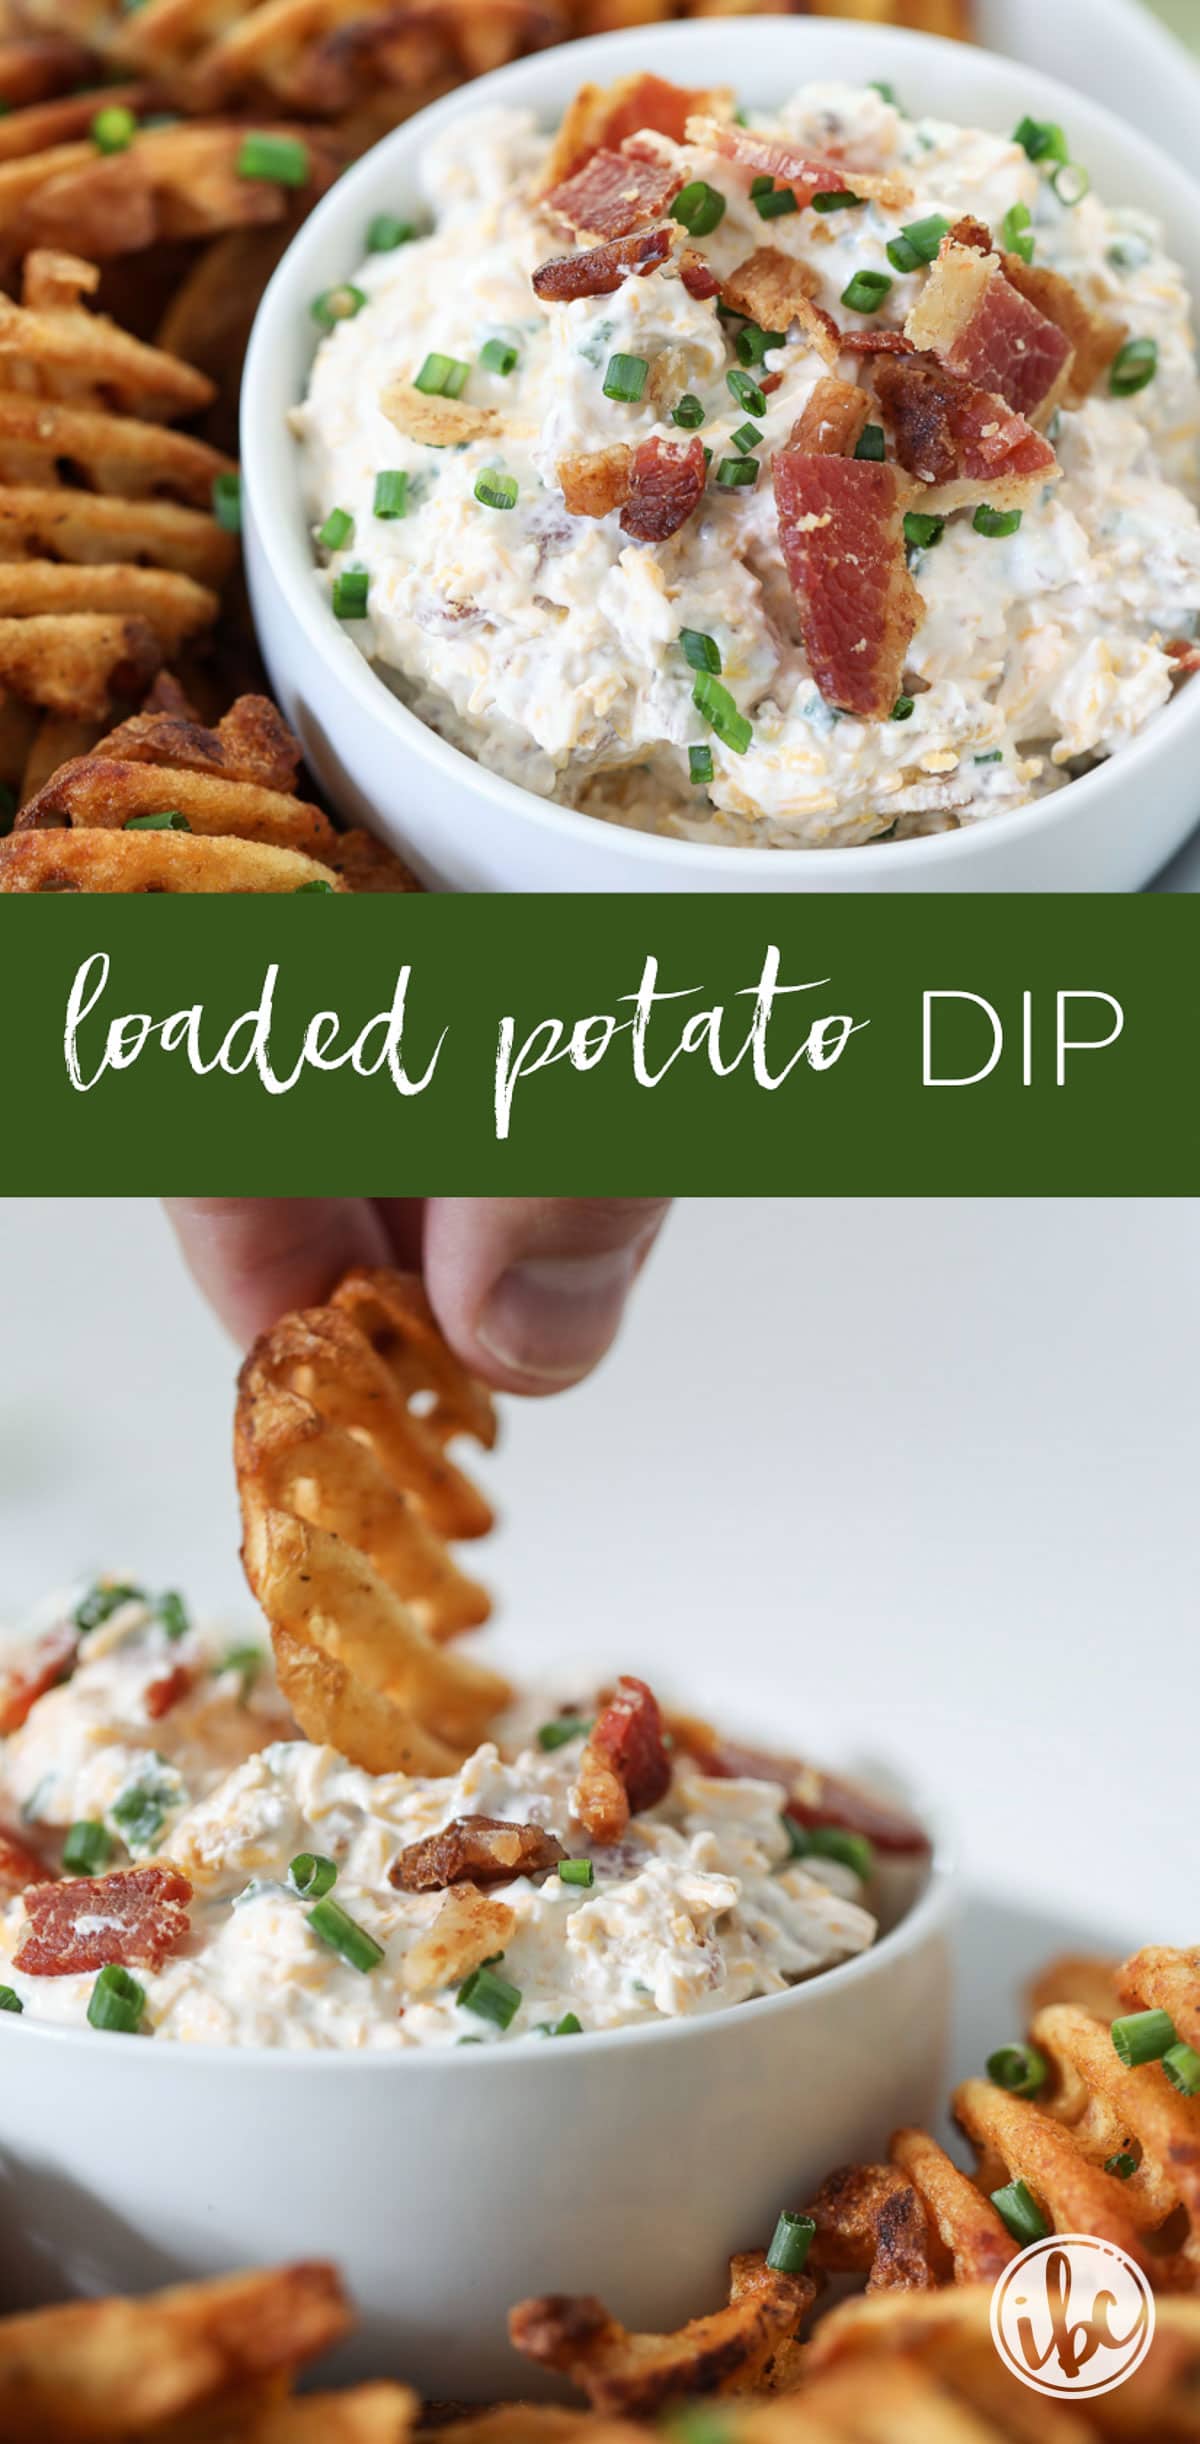 This Loaded Potato Dip served with waffle fries make a delicious and easy appetizer recipe. #loaded #baked #potato #dip #appetizer #recipe #wafflefries